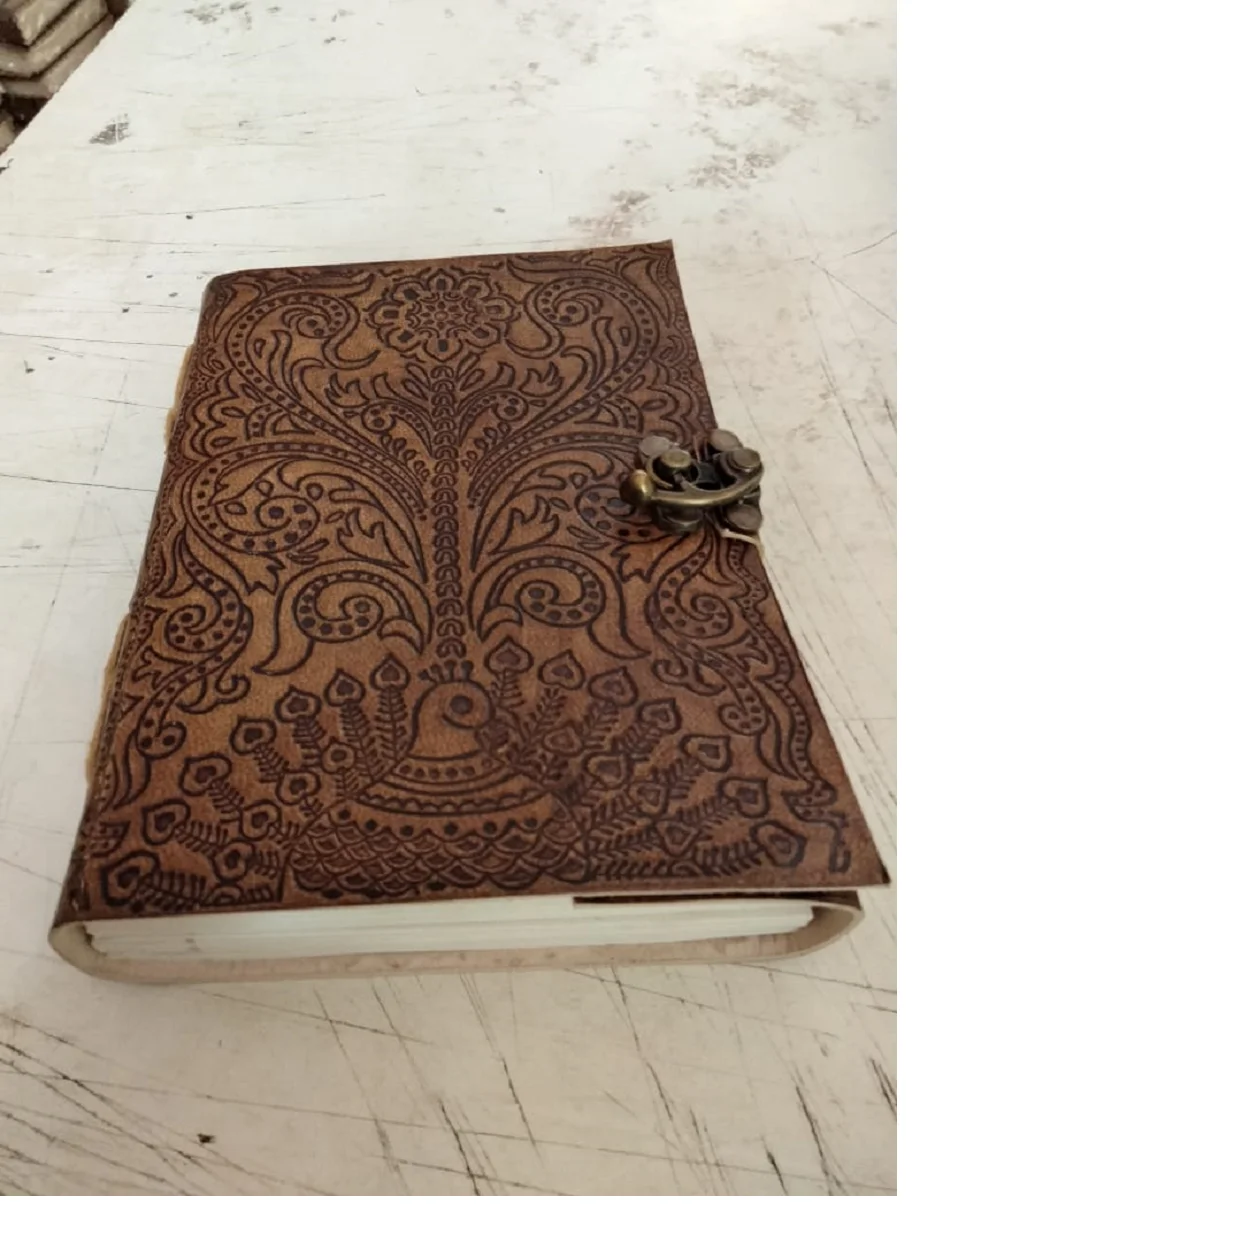 handmade paper journals with old antique theme covers